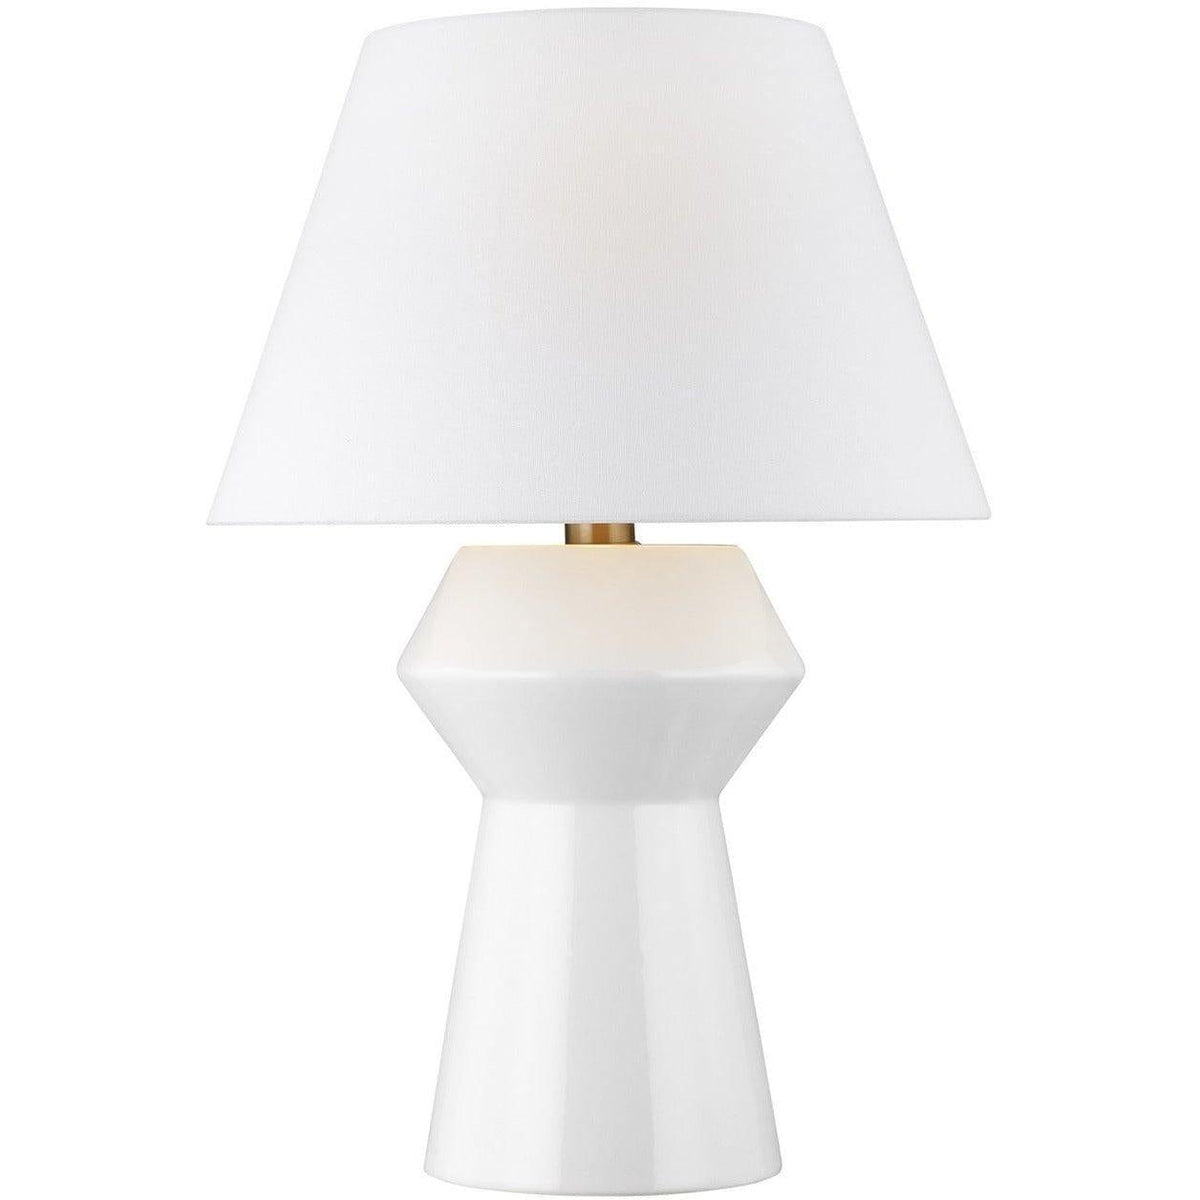 Visual Comfort Studio Collection - Abaco Inverted Table Lamp - CT1061ARCBBS1 | Montreal Lighting & Hardware